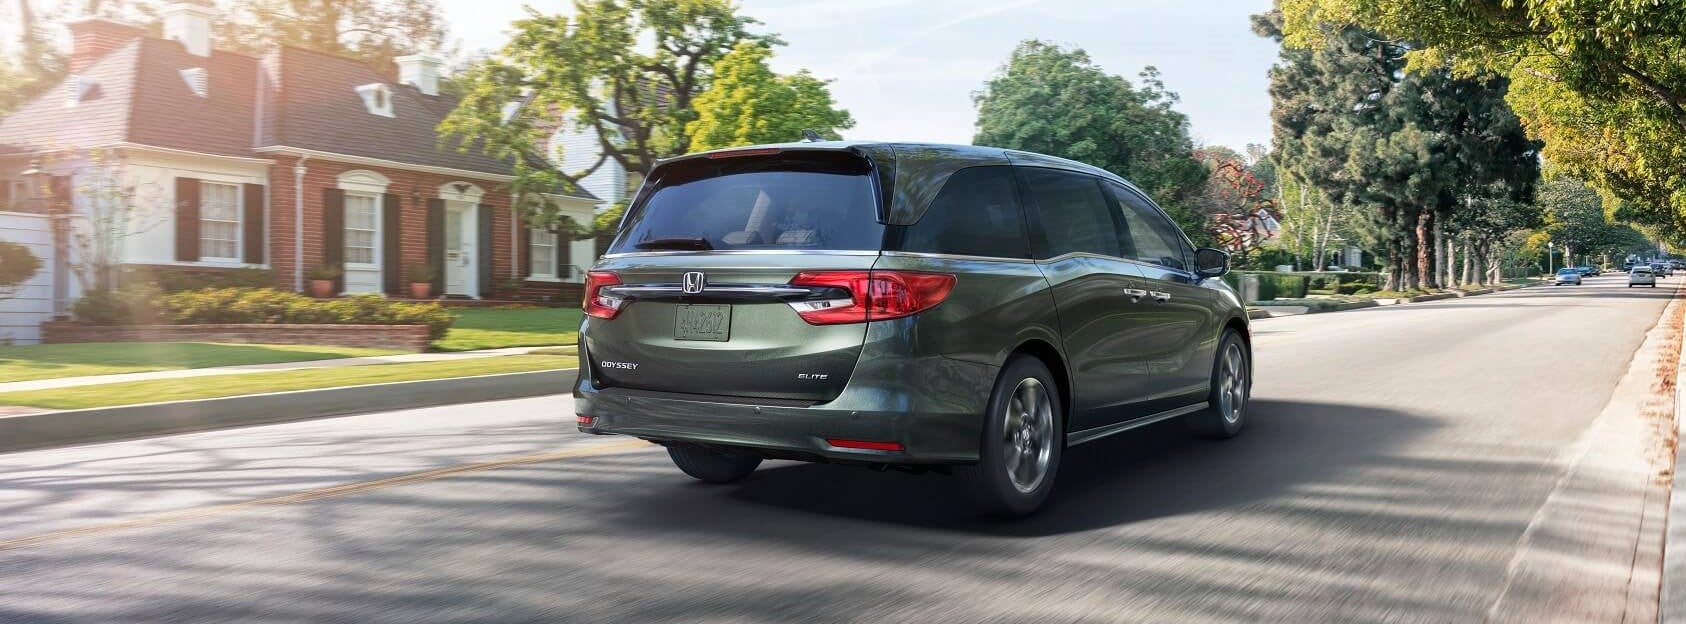 2021 Odyssey Trim Levels Bloomington IN